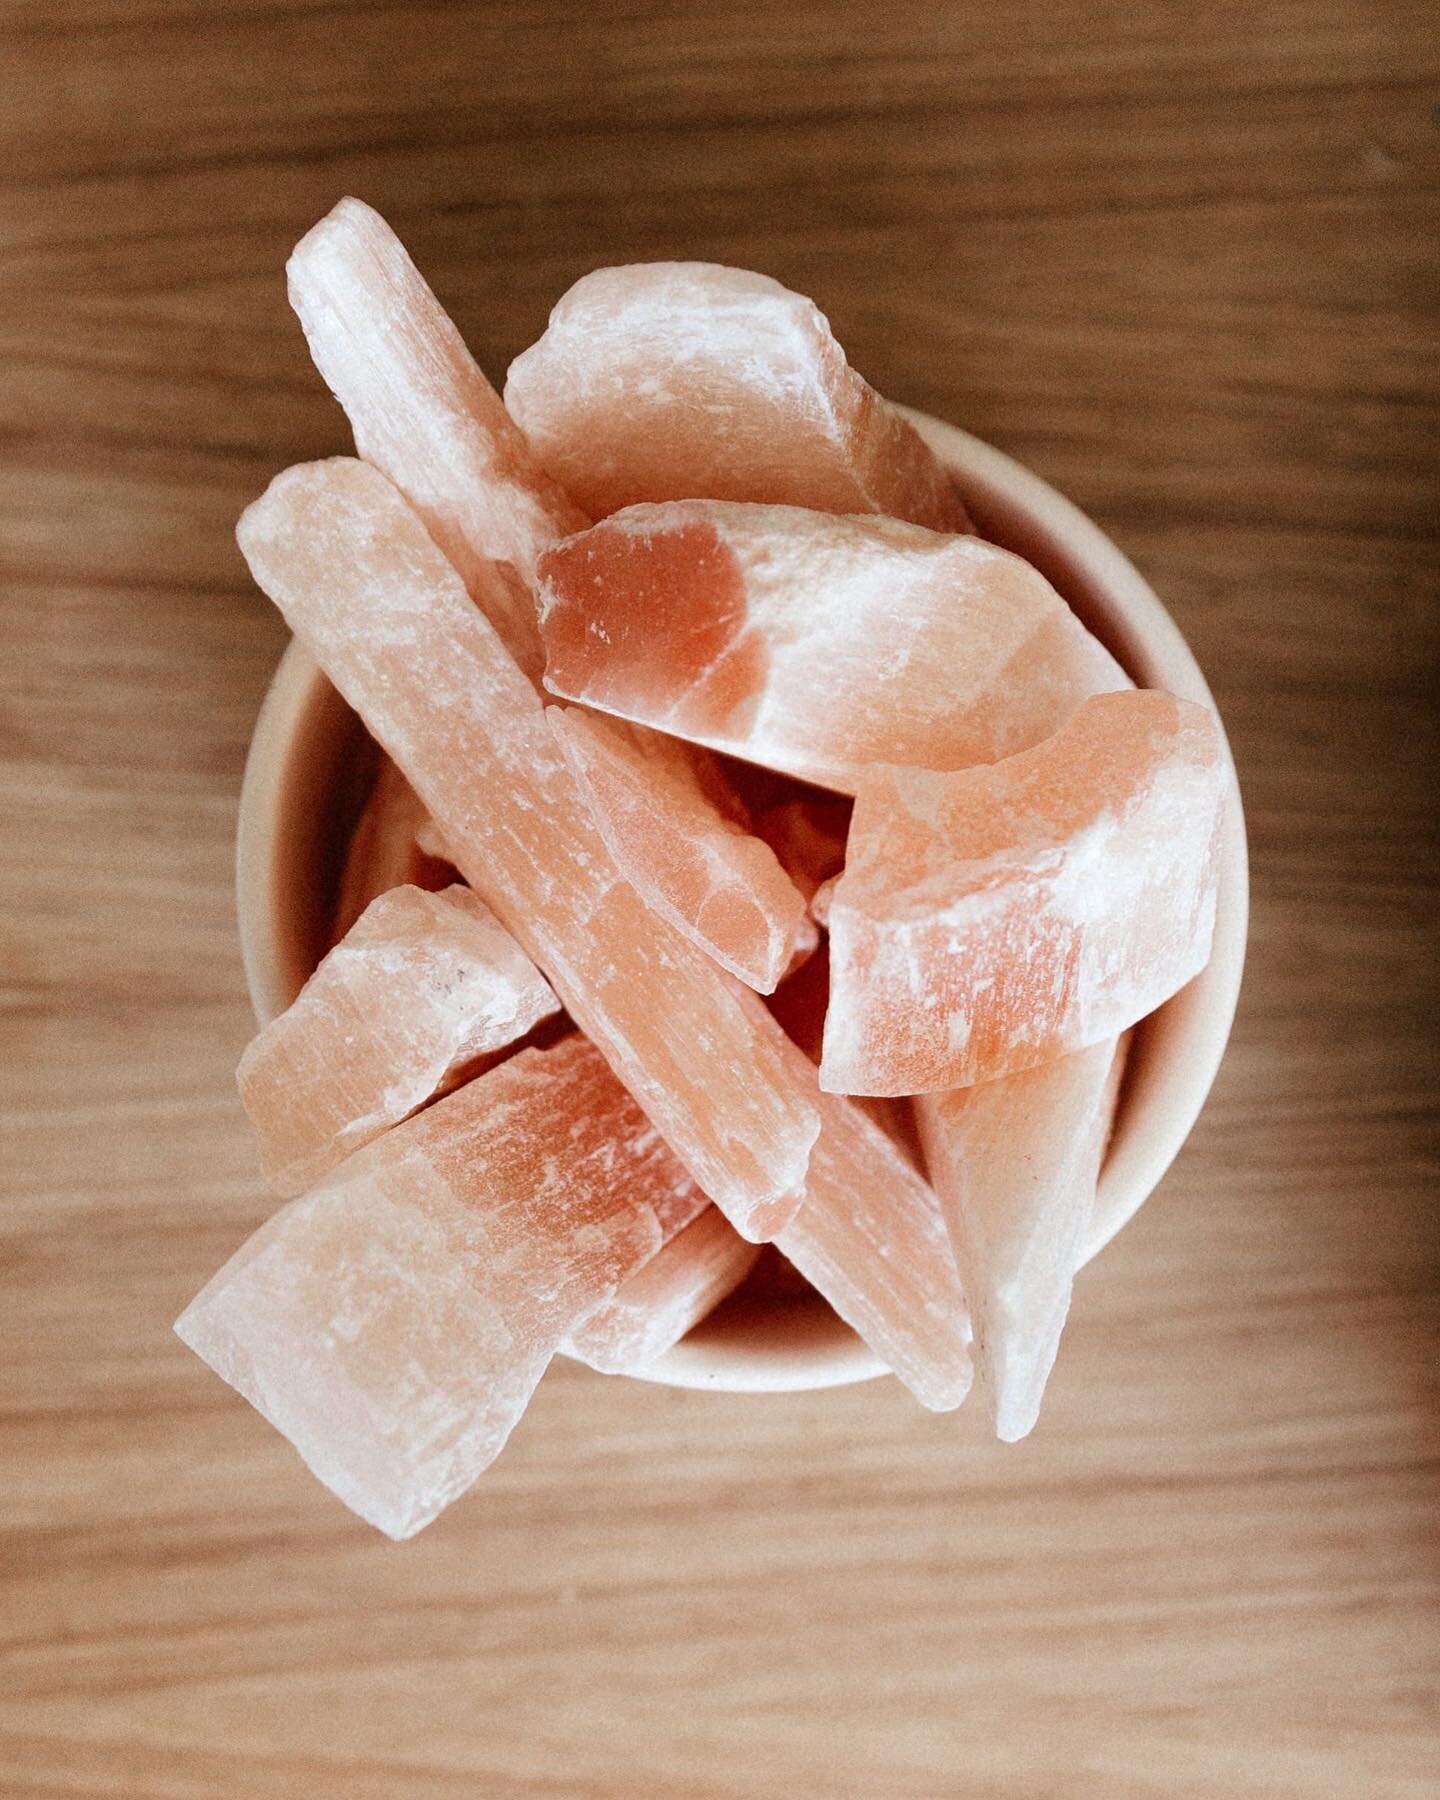 Even though it's snowing outside right now, we're dreaming of Spring. These yummy pieces of Peach Selenite in our new LIGHT MY FIRE Spring Collection have us daydreaming about budding cherry blossoms, late afternoons at the park and sipping a glass o